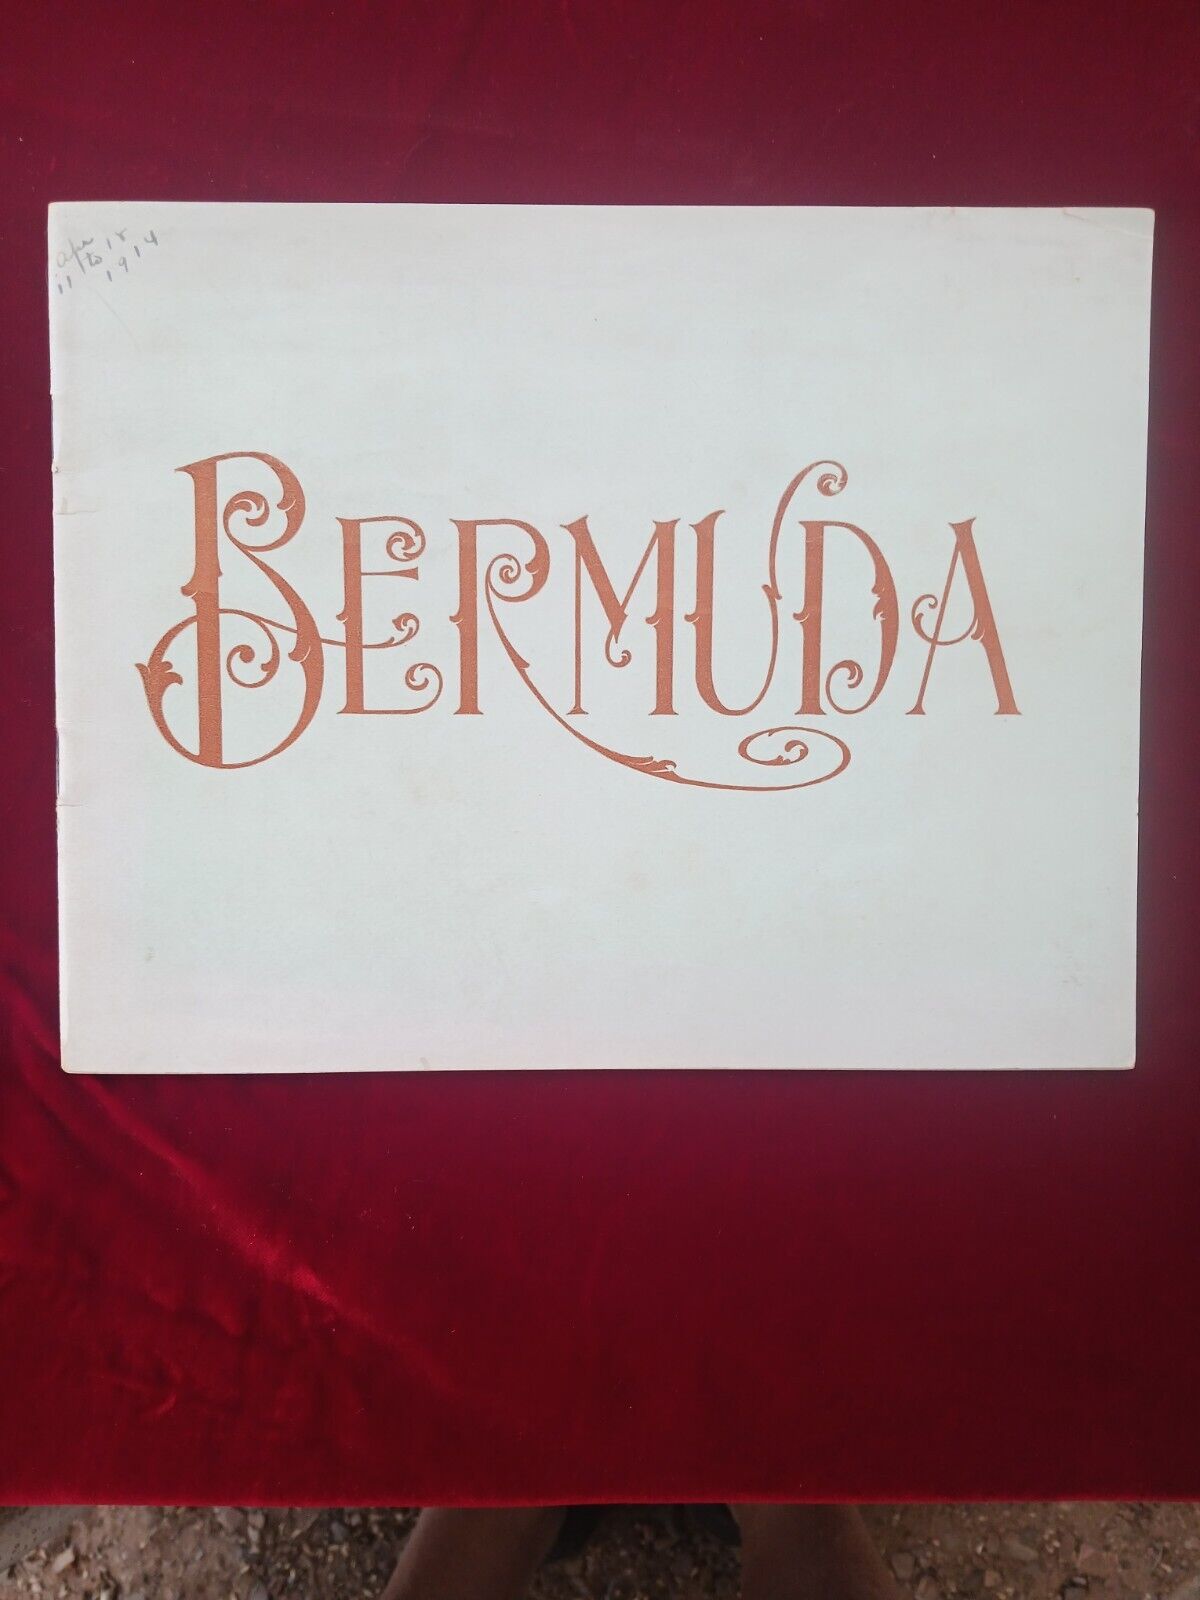 Beautiful Tourist Photo Book of Bermuda, Old Black and White Photographs 